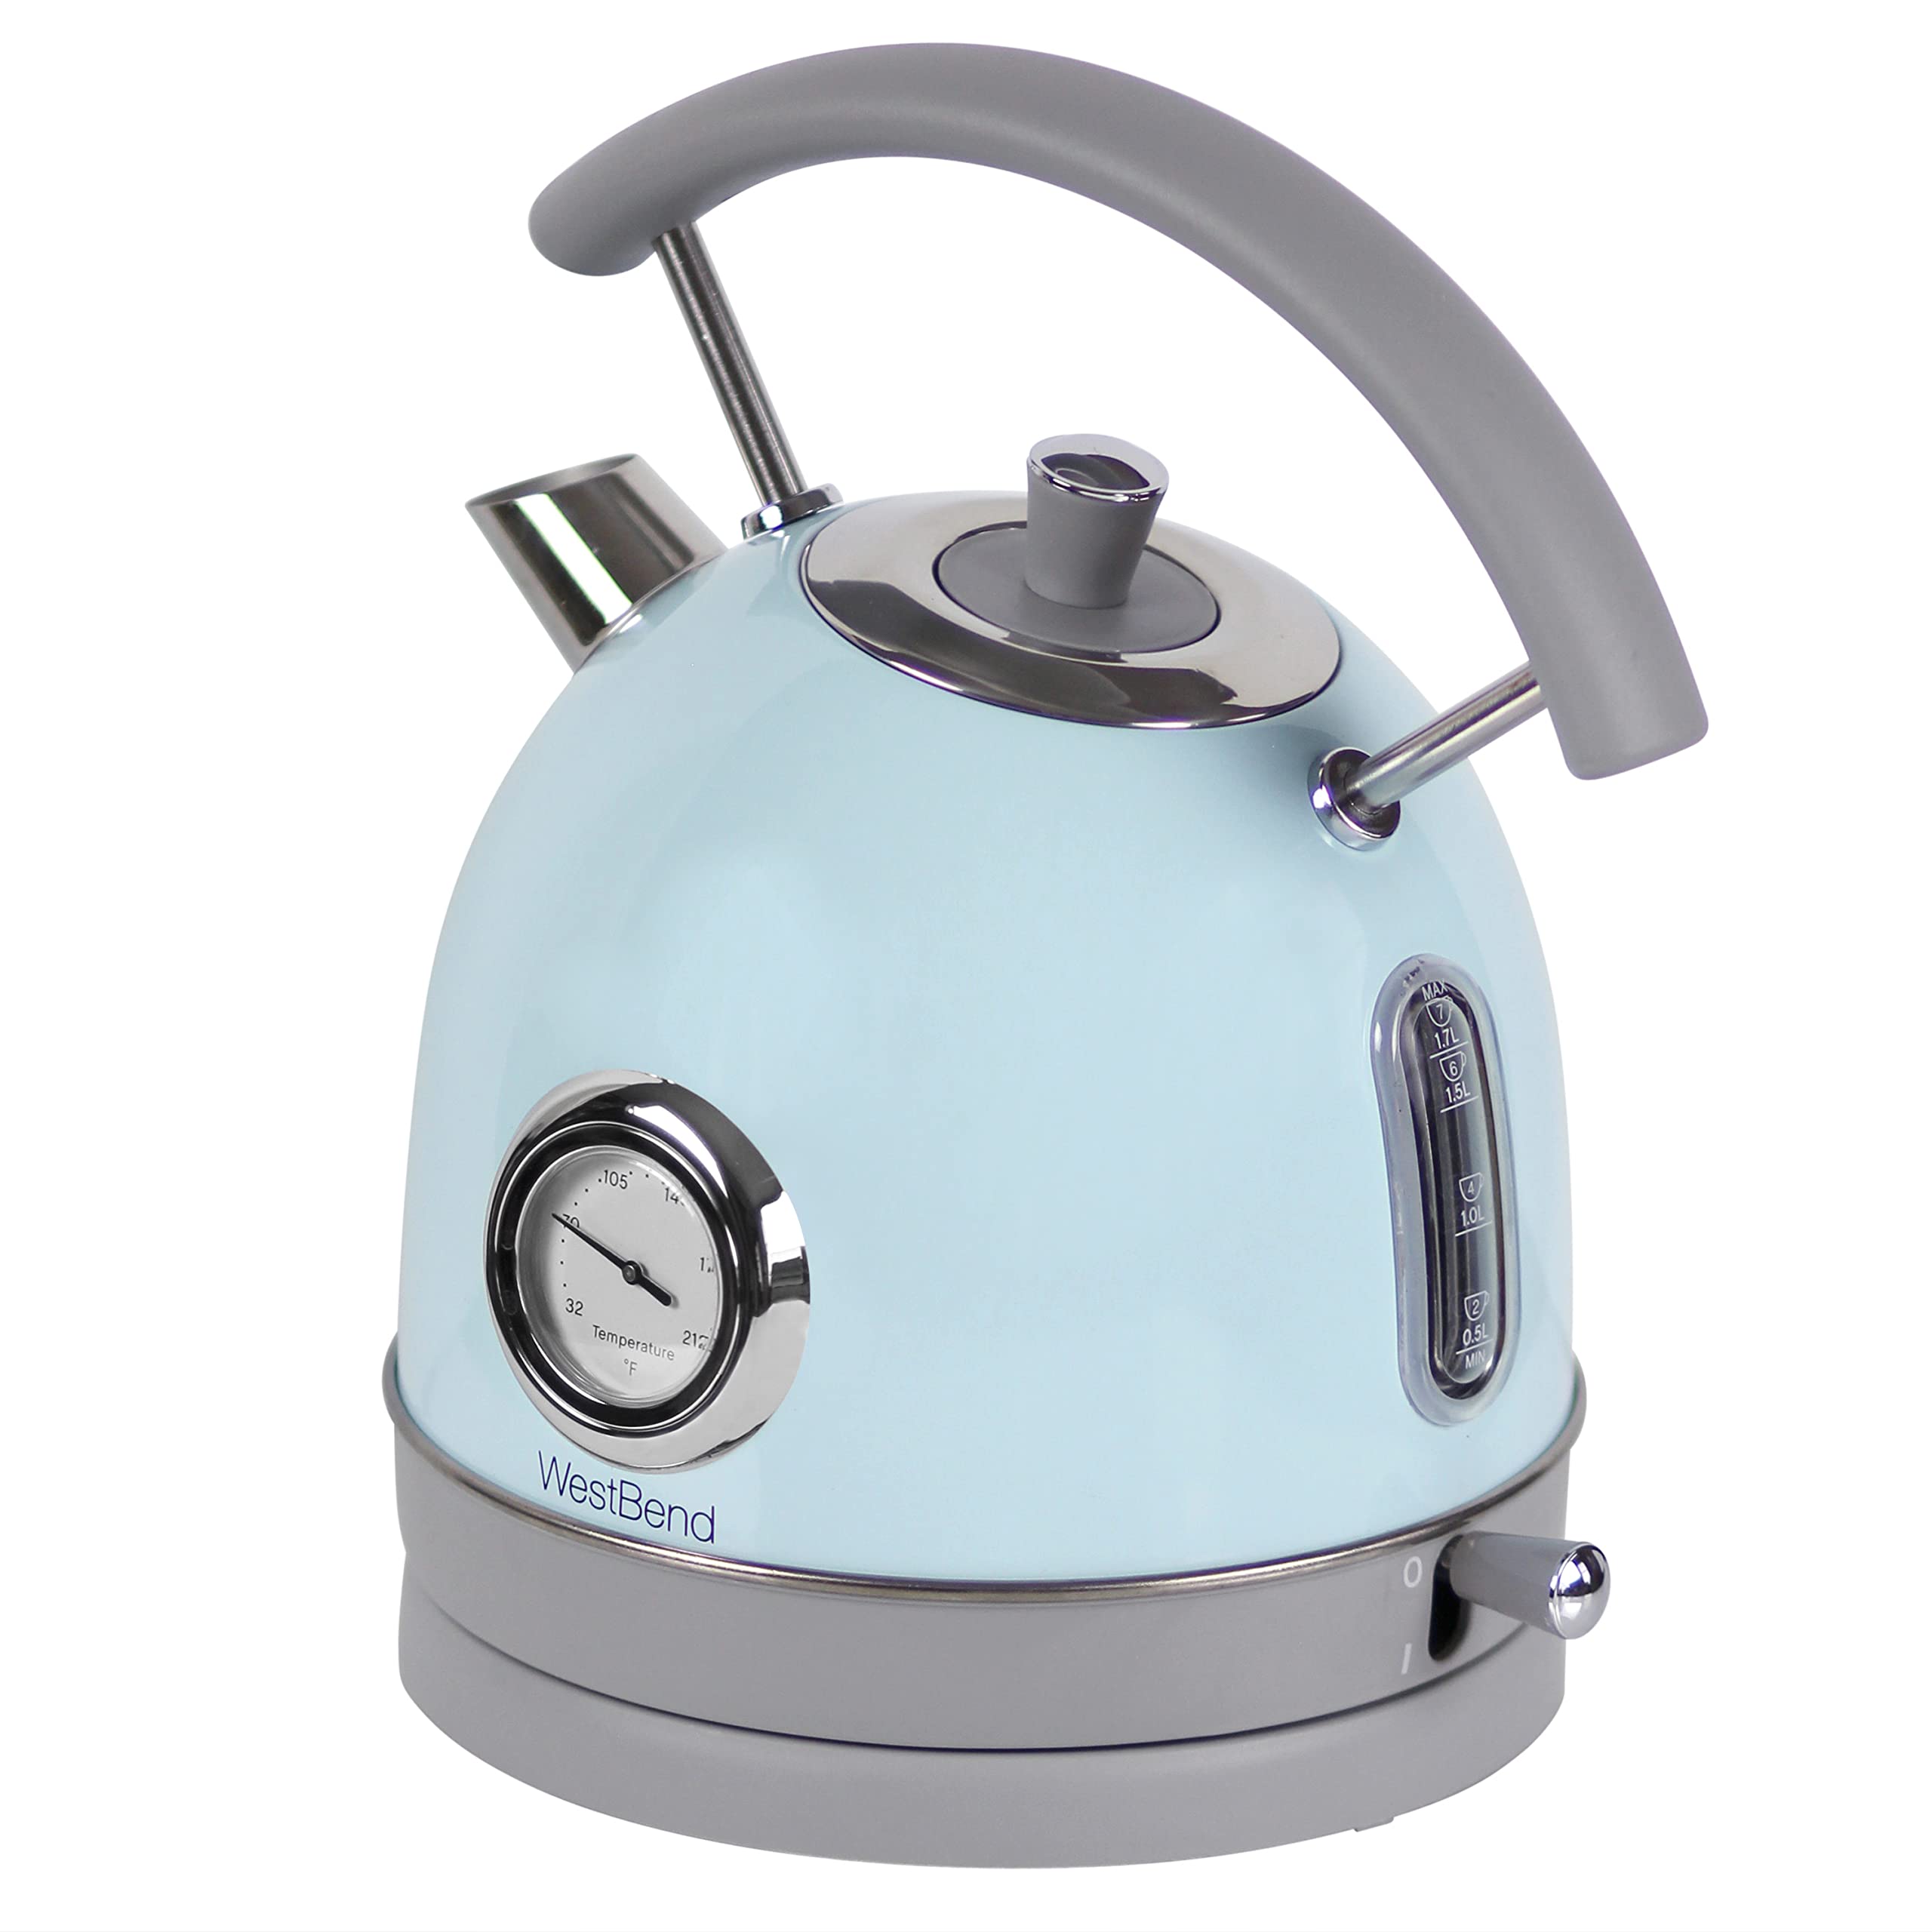 West Bend Electric Kettle Retro-Styled Stainless Steel 1500 Watts with Auto-Shutoff & Boil-Dry Protection, 1.7-Liter, Blue